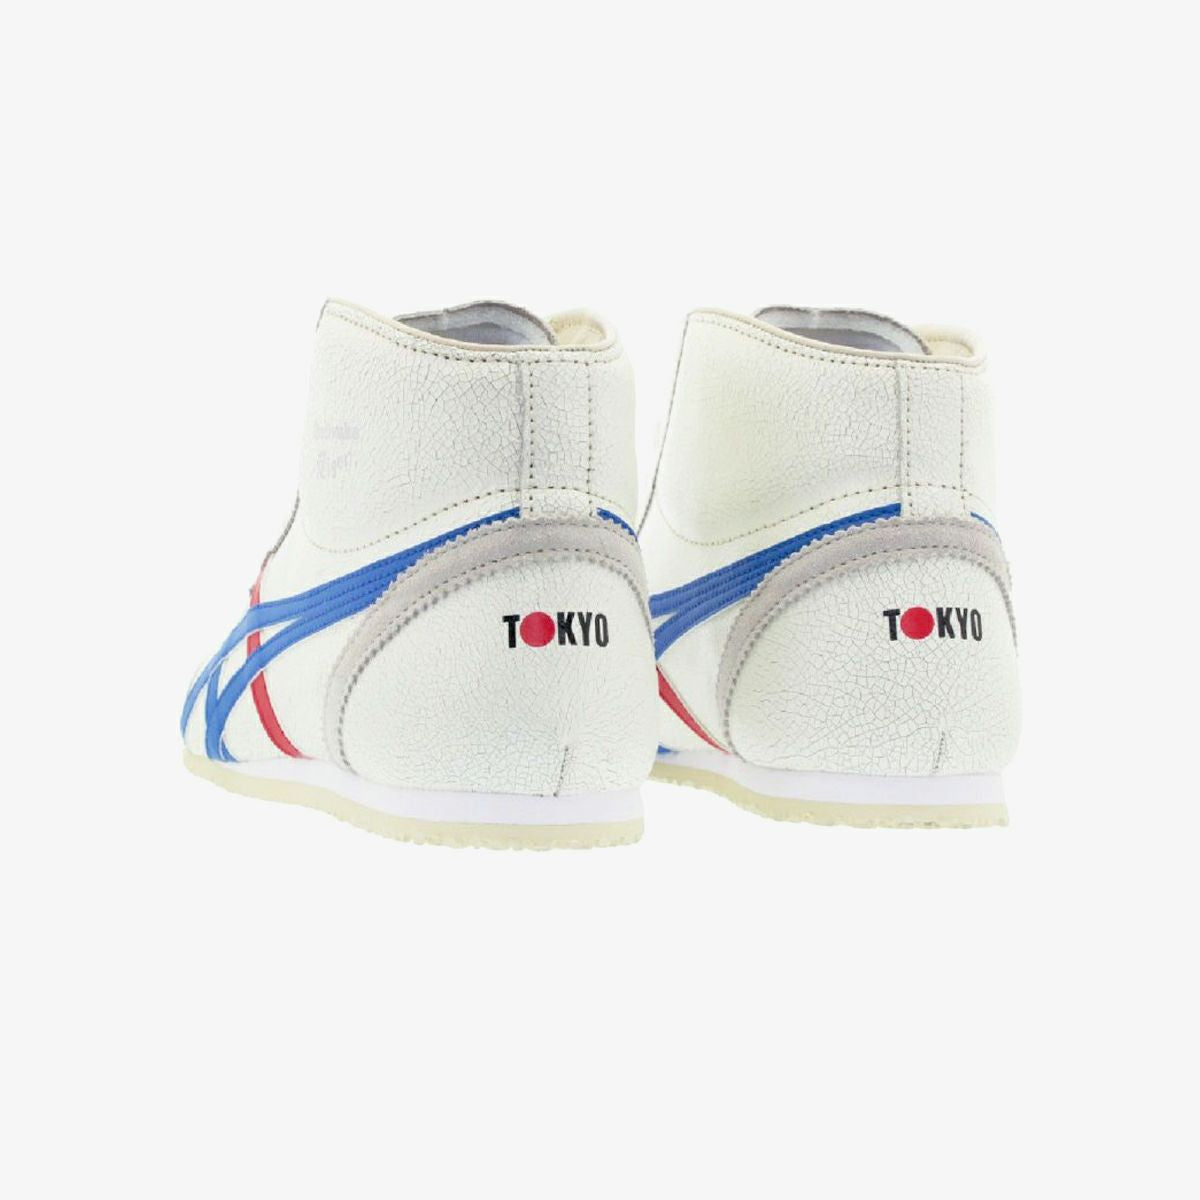 Onitsuka Tiger MEXICO MID RUNNER WHITE/BLUE/RED thl328-0142 